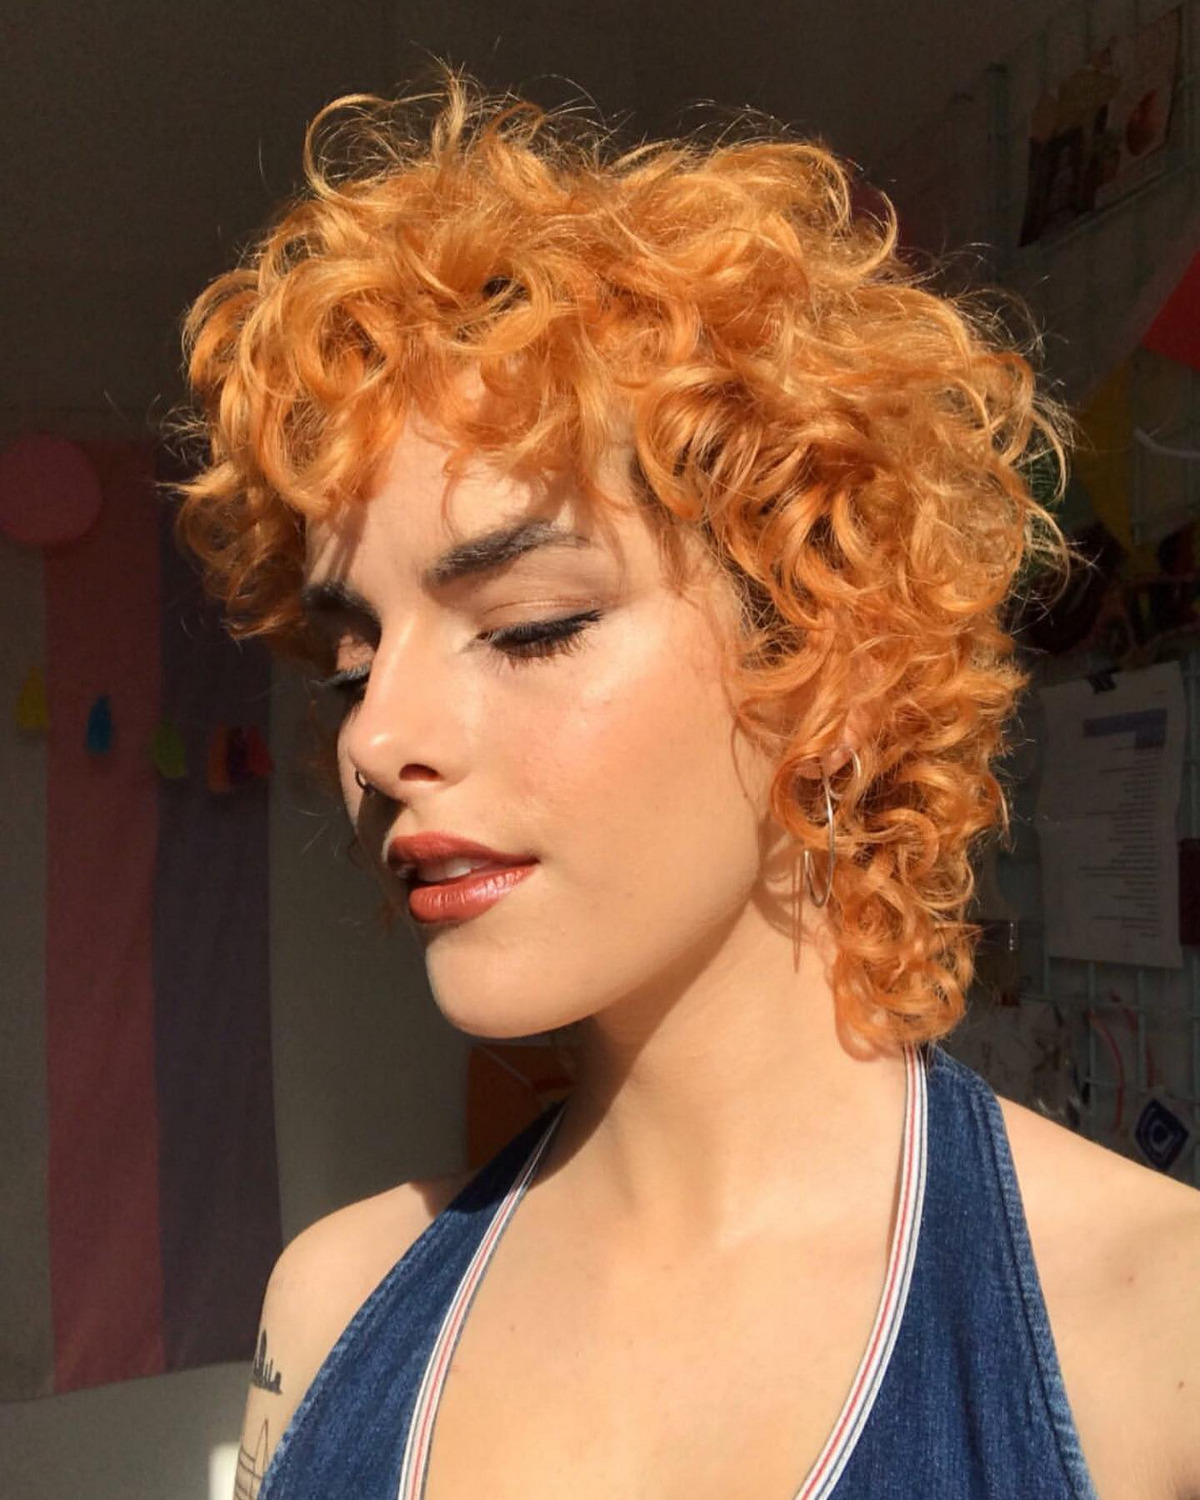 Copper Short Curly Hair